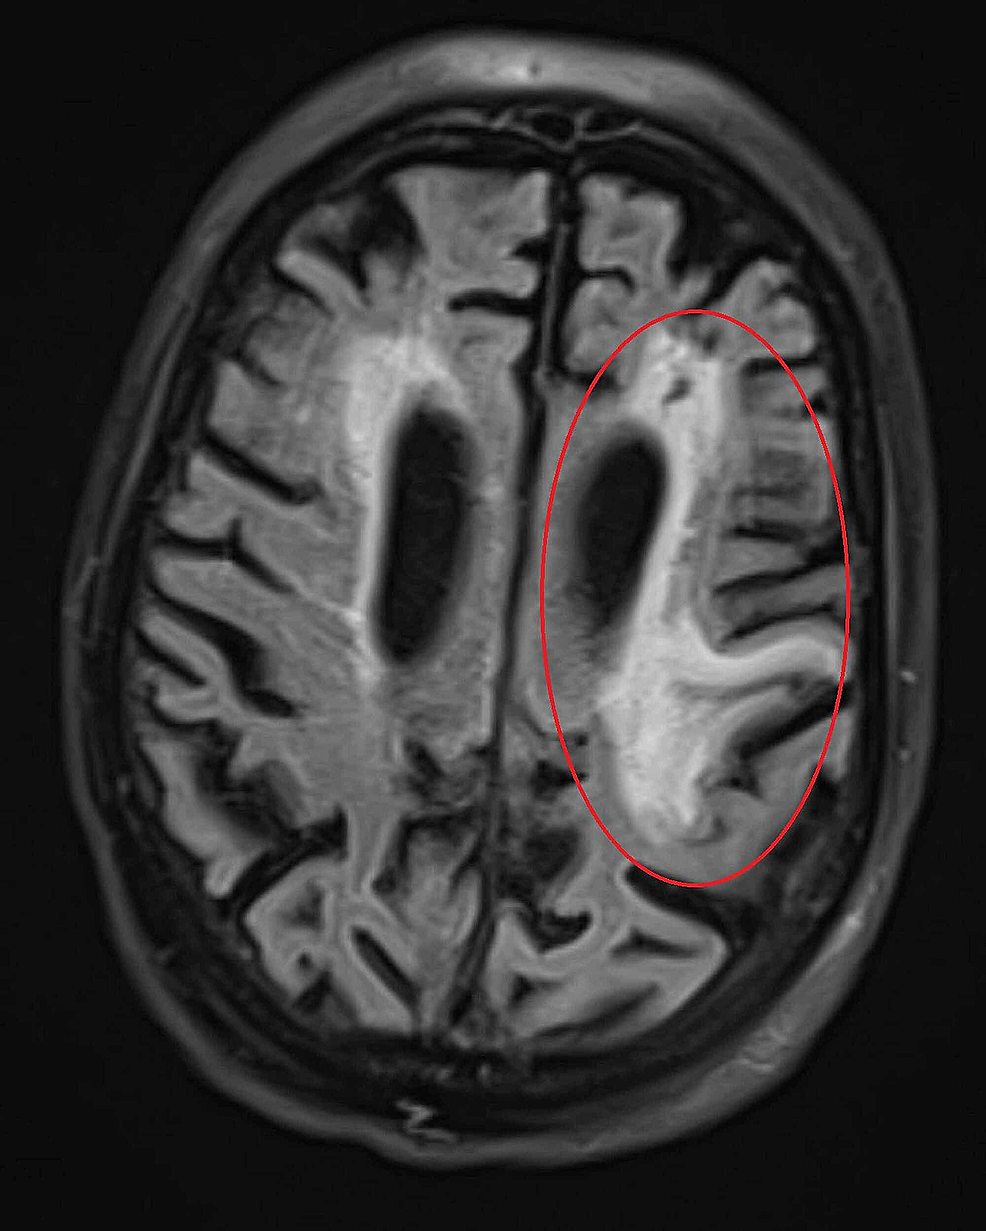 MR-axial-FLAIR-sequence-showing-increased-signal-in-left-frontal-lobe-representing-chronic-encephalomalacia.